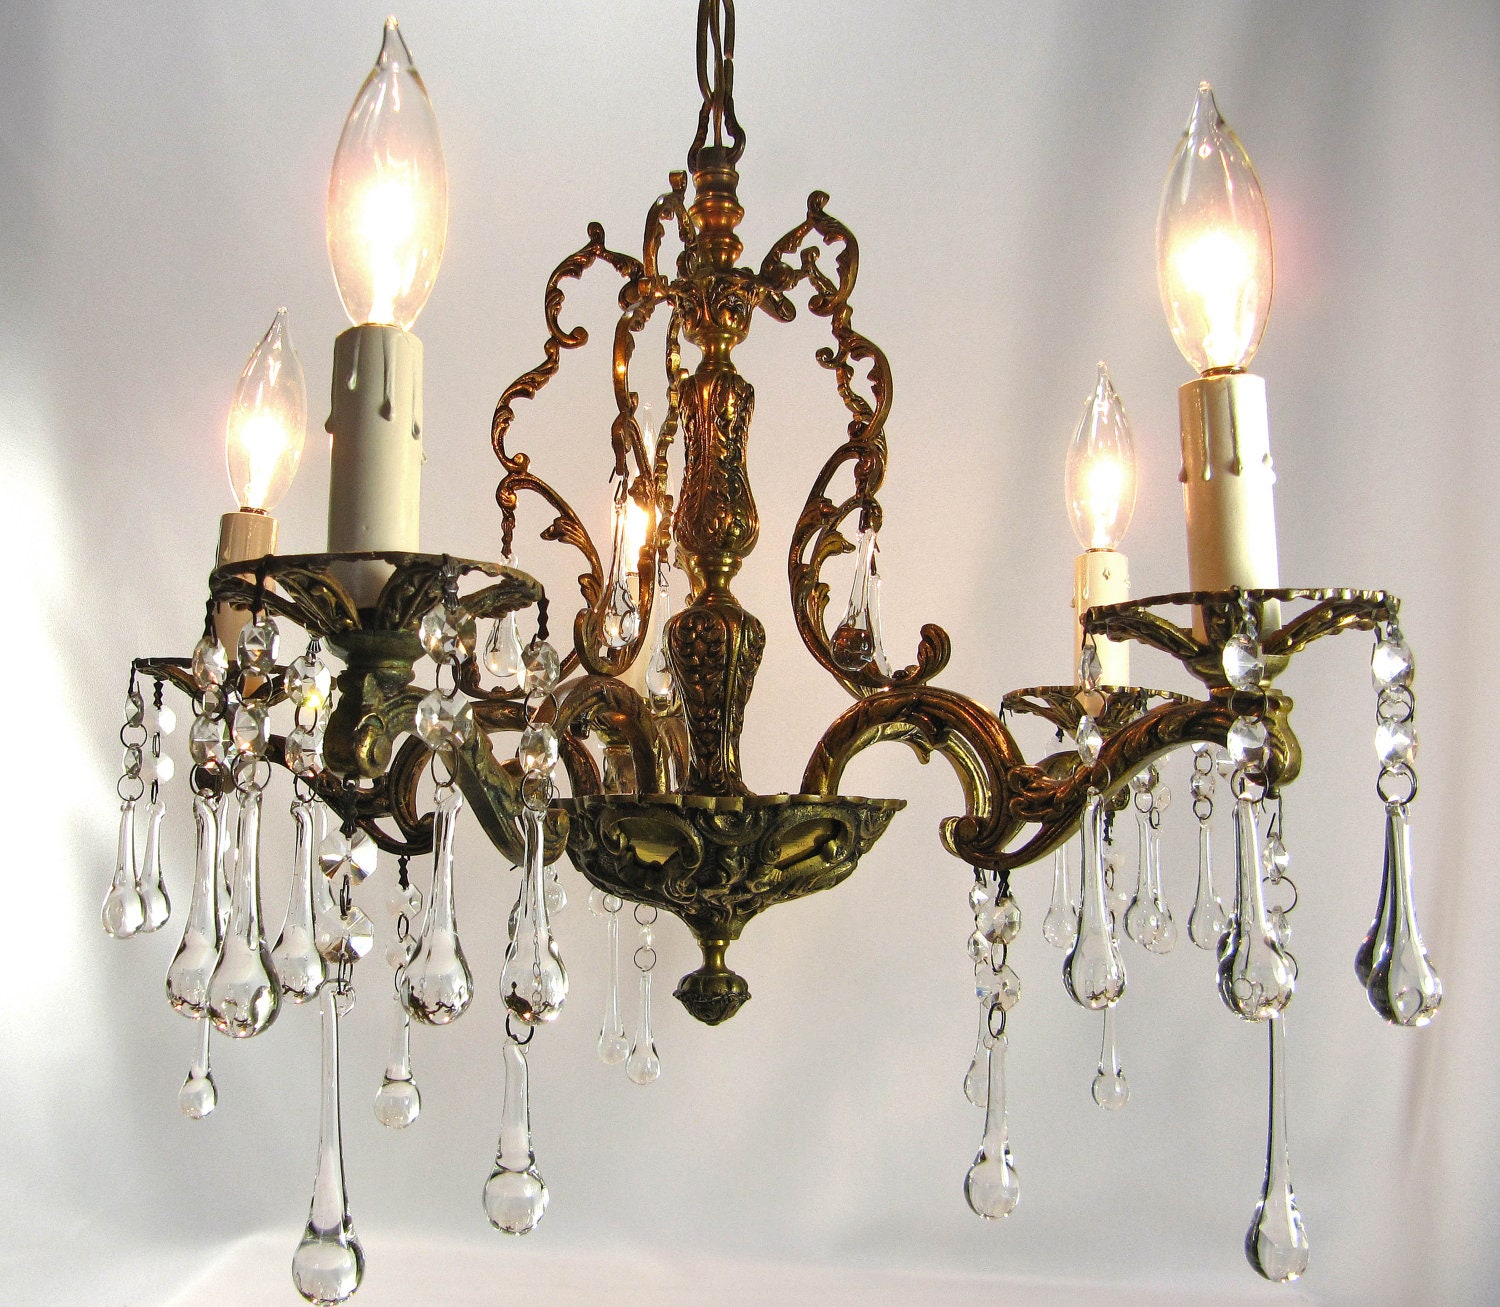 Chandeliers http://www.etsy.com/listing/103816475 made Made brass  chandelier Spain  antique spain Brass  in in